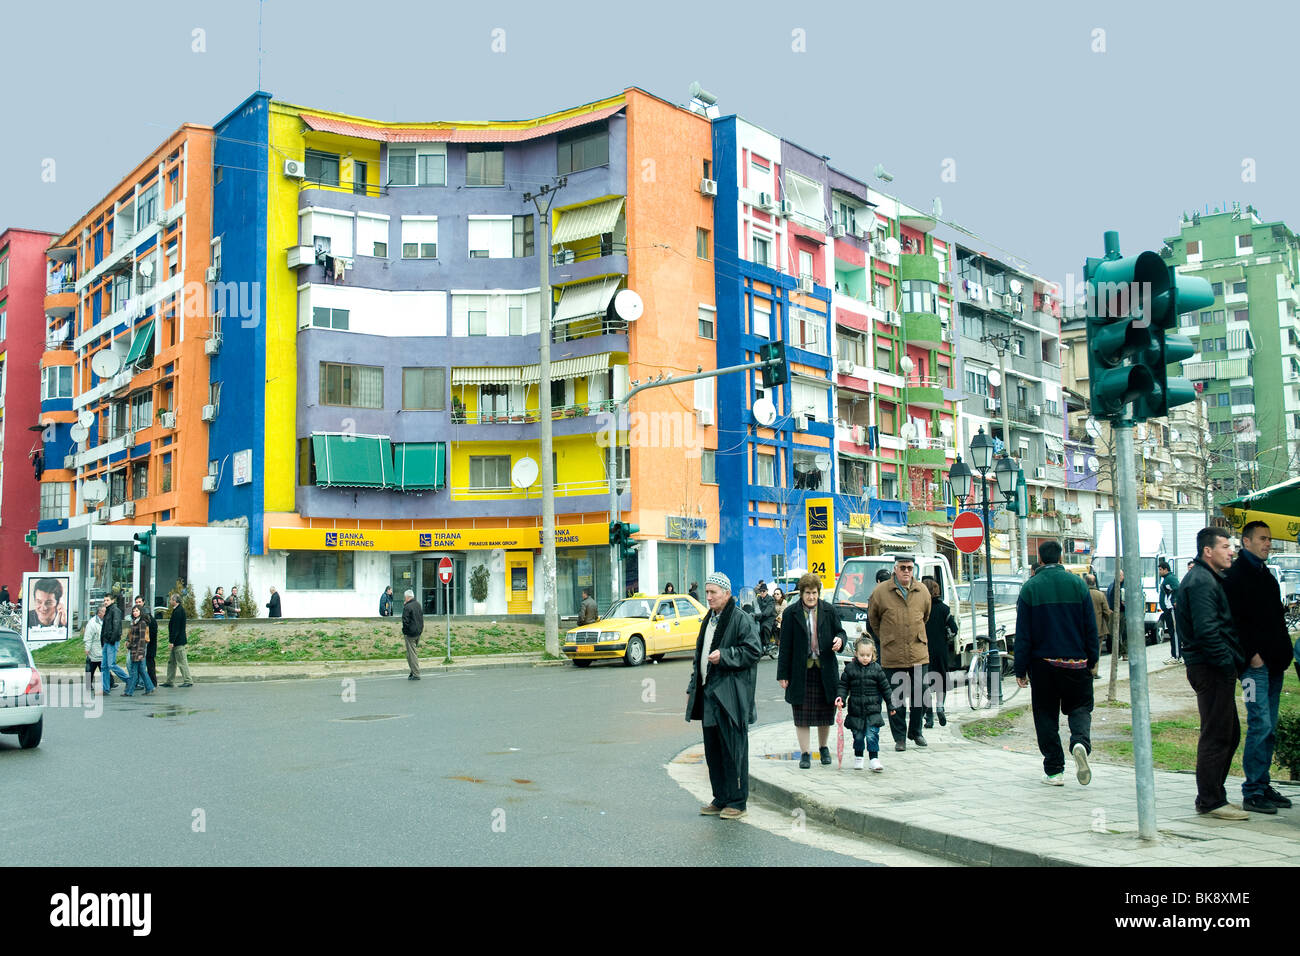 Many buildings in Albania's capital Tirana are painted, by a mayor.'s  caprice, in patterns of vivid colour Stock Photo - Alamy